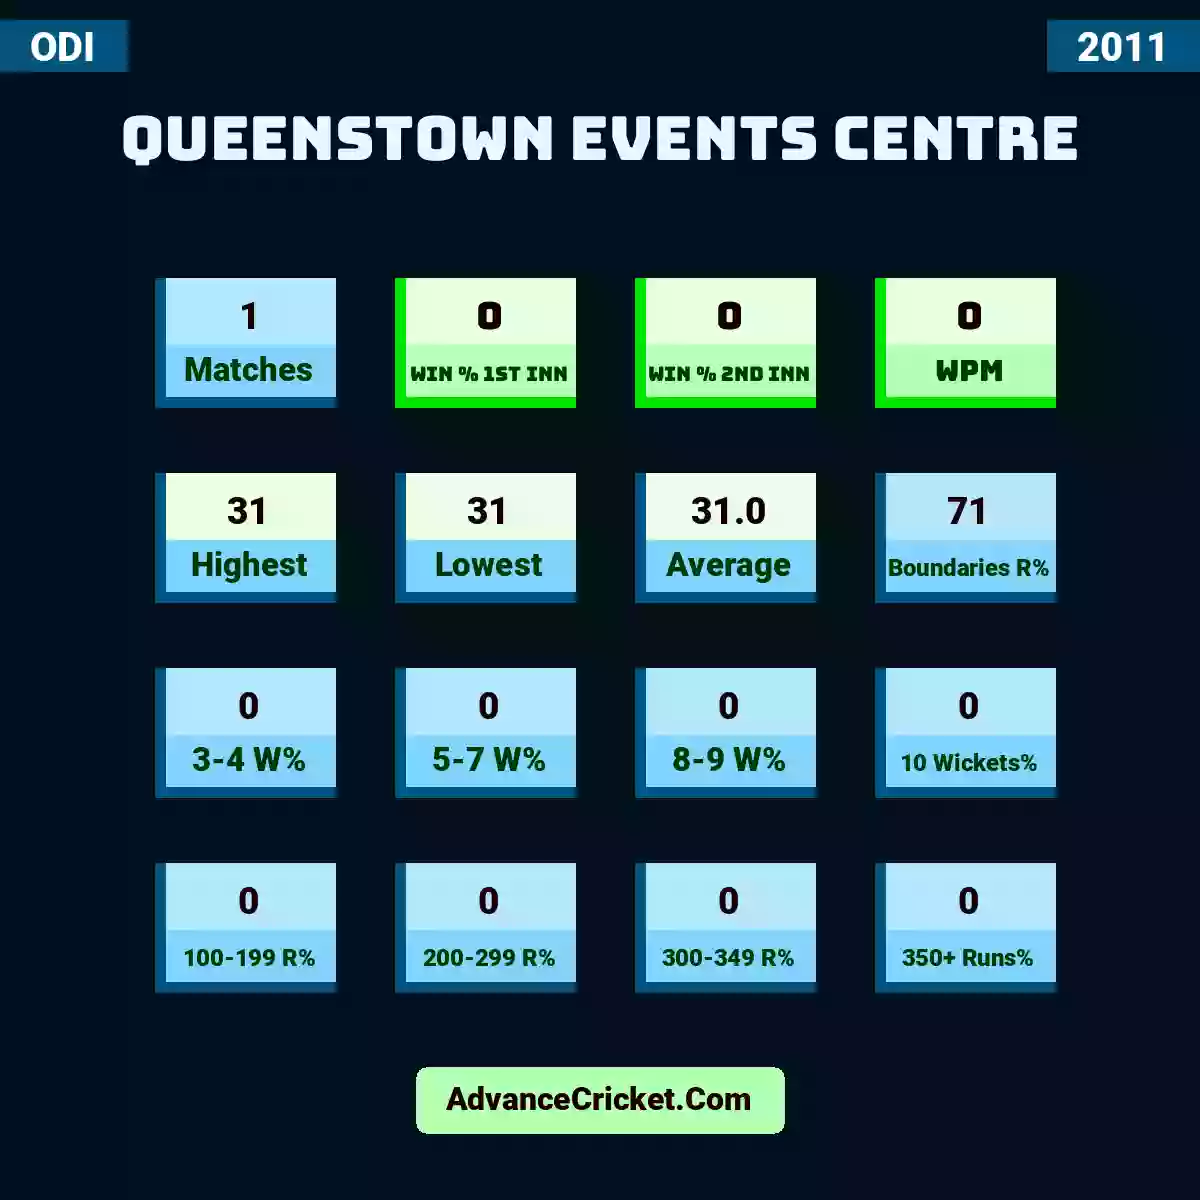 Image showing Queenstown Events Centre with Matches: 1, Win % 1st Inn: 0, Win % 2nd Inn: 0, WPM: 0, Highest: 31, Lowest: 31, Average: 31.0, Boundaries R%: 71, 3-4 W%: 0, 5-7 W%: 0, 8-9 W%: 0, 10 Wickets%: 0, 100-199 R%: 0, 200-299 R%: 0, 300-349 R%: 0, 350+ Runs%: 0.